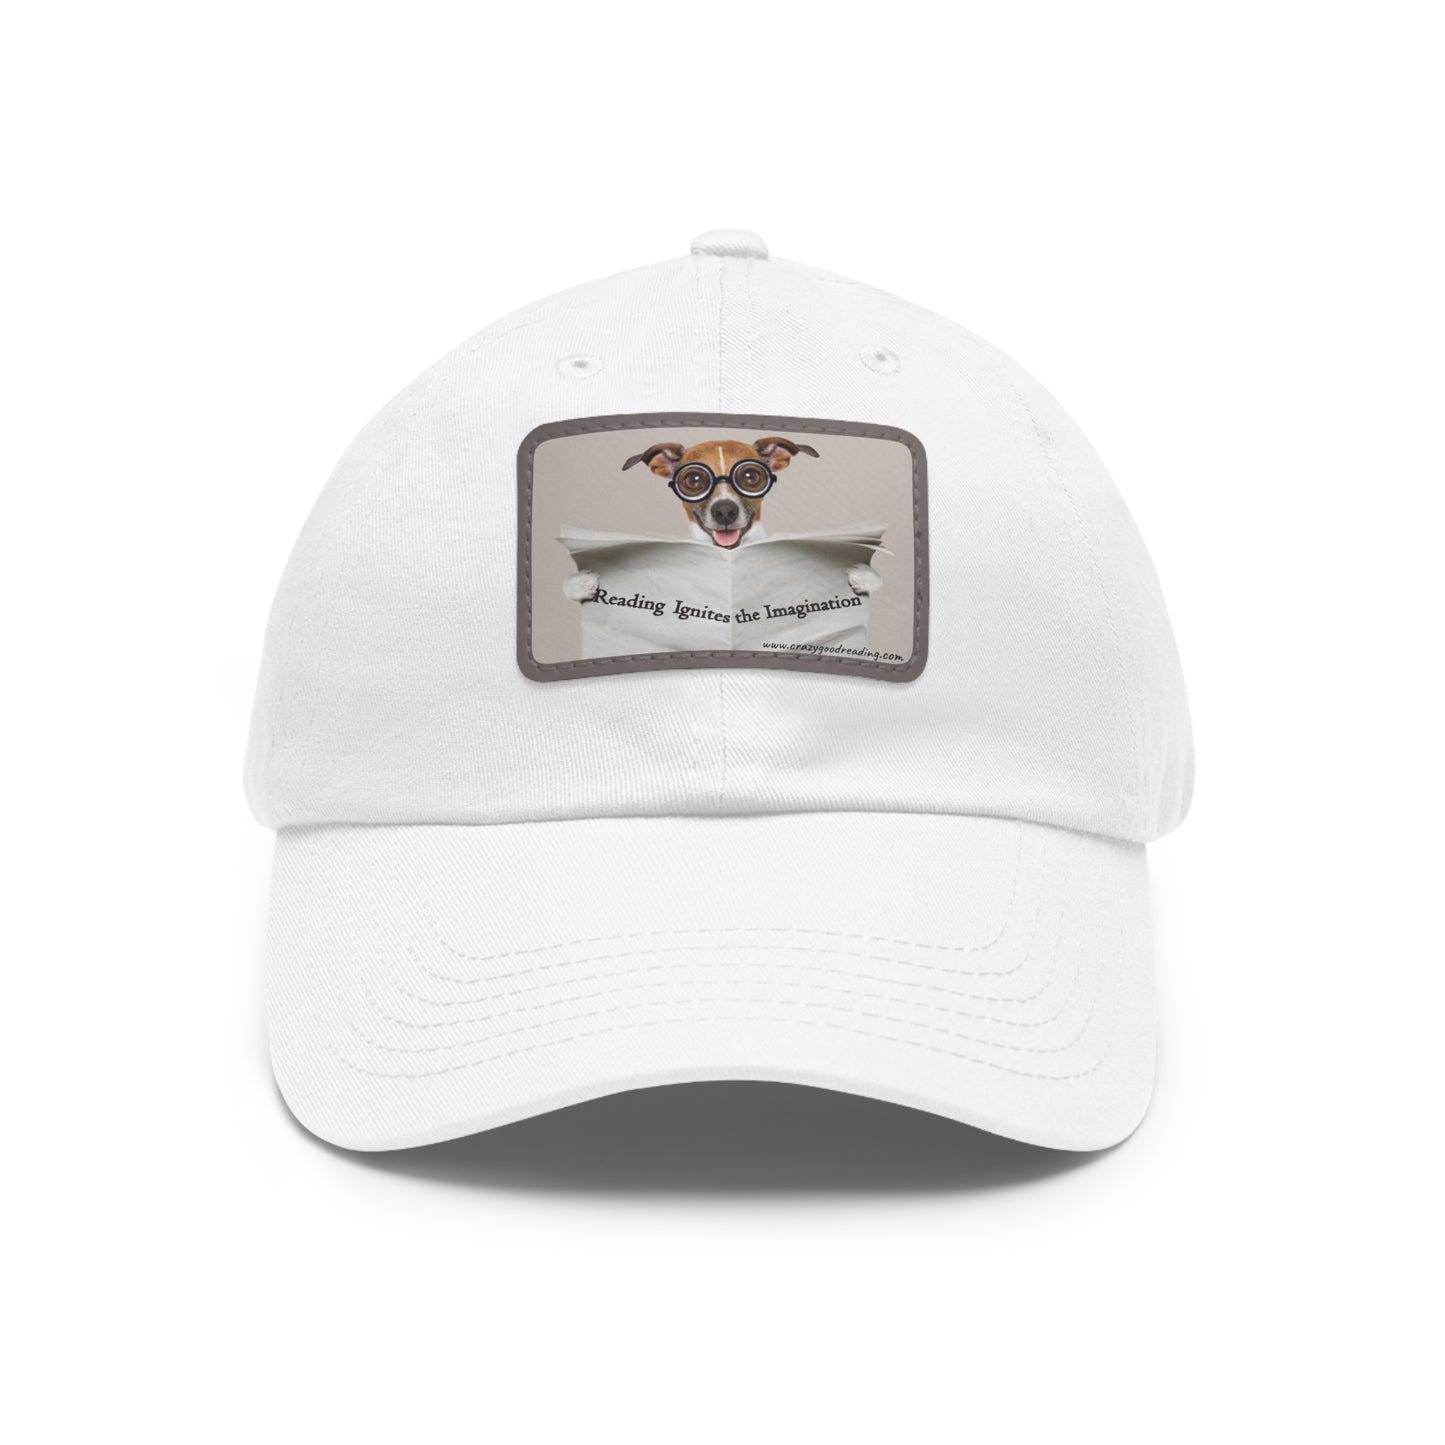 Dad Hat with Leather Patch (Rectangle) "Reading Ignites Imagination"